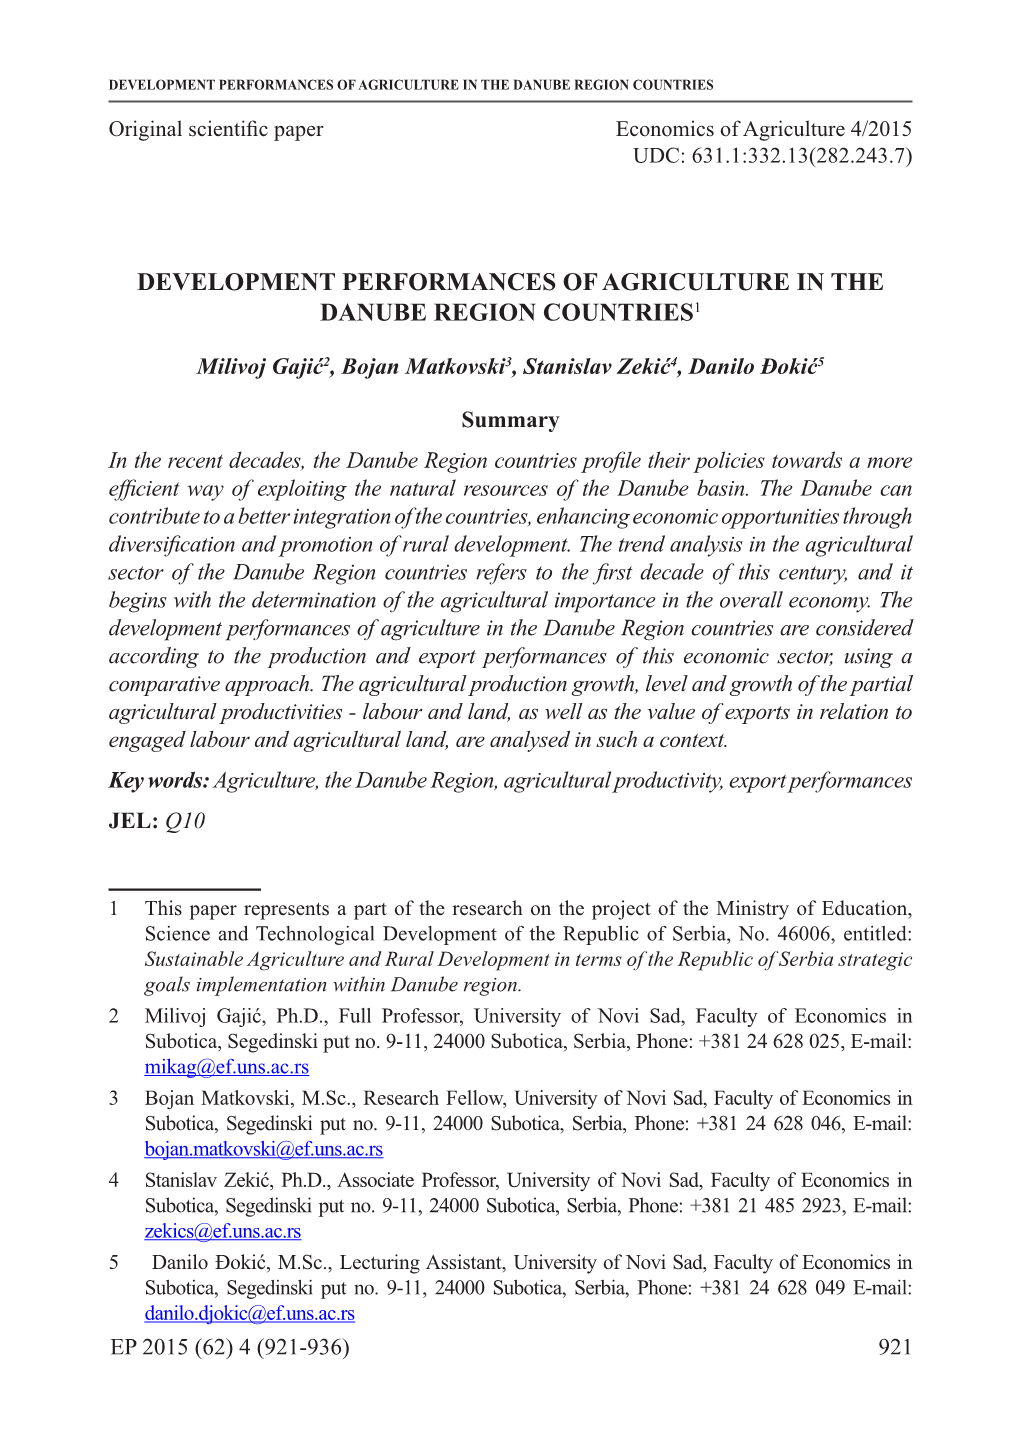 Development Performances of Agriculture in the Danube Region Countries